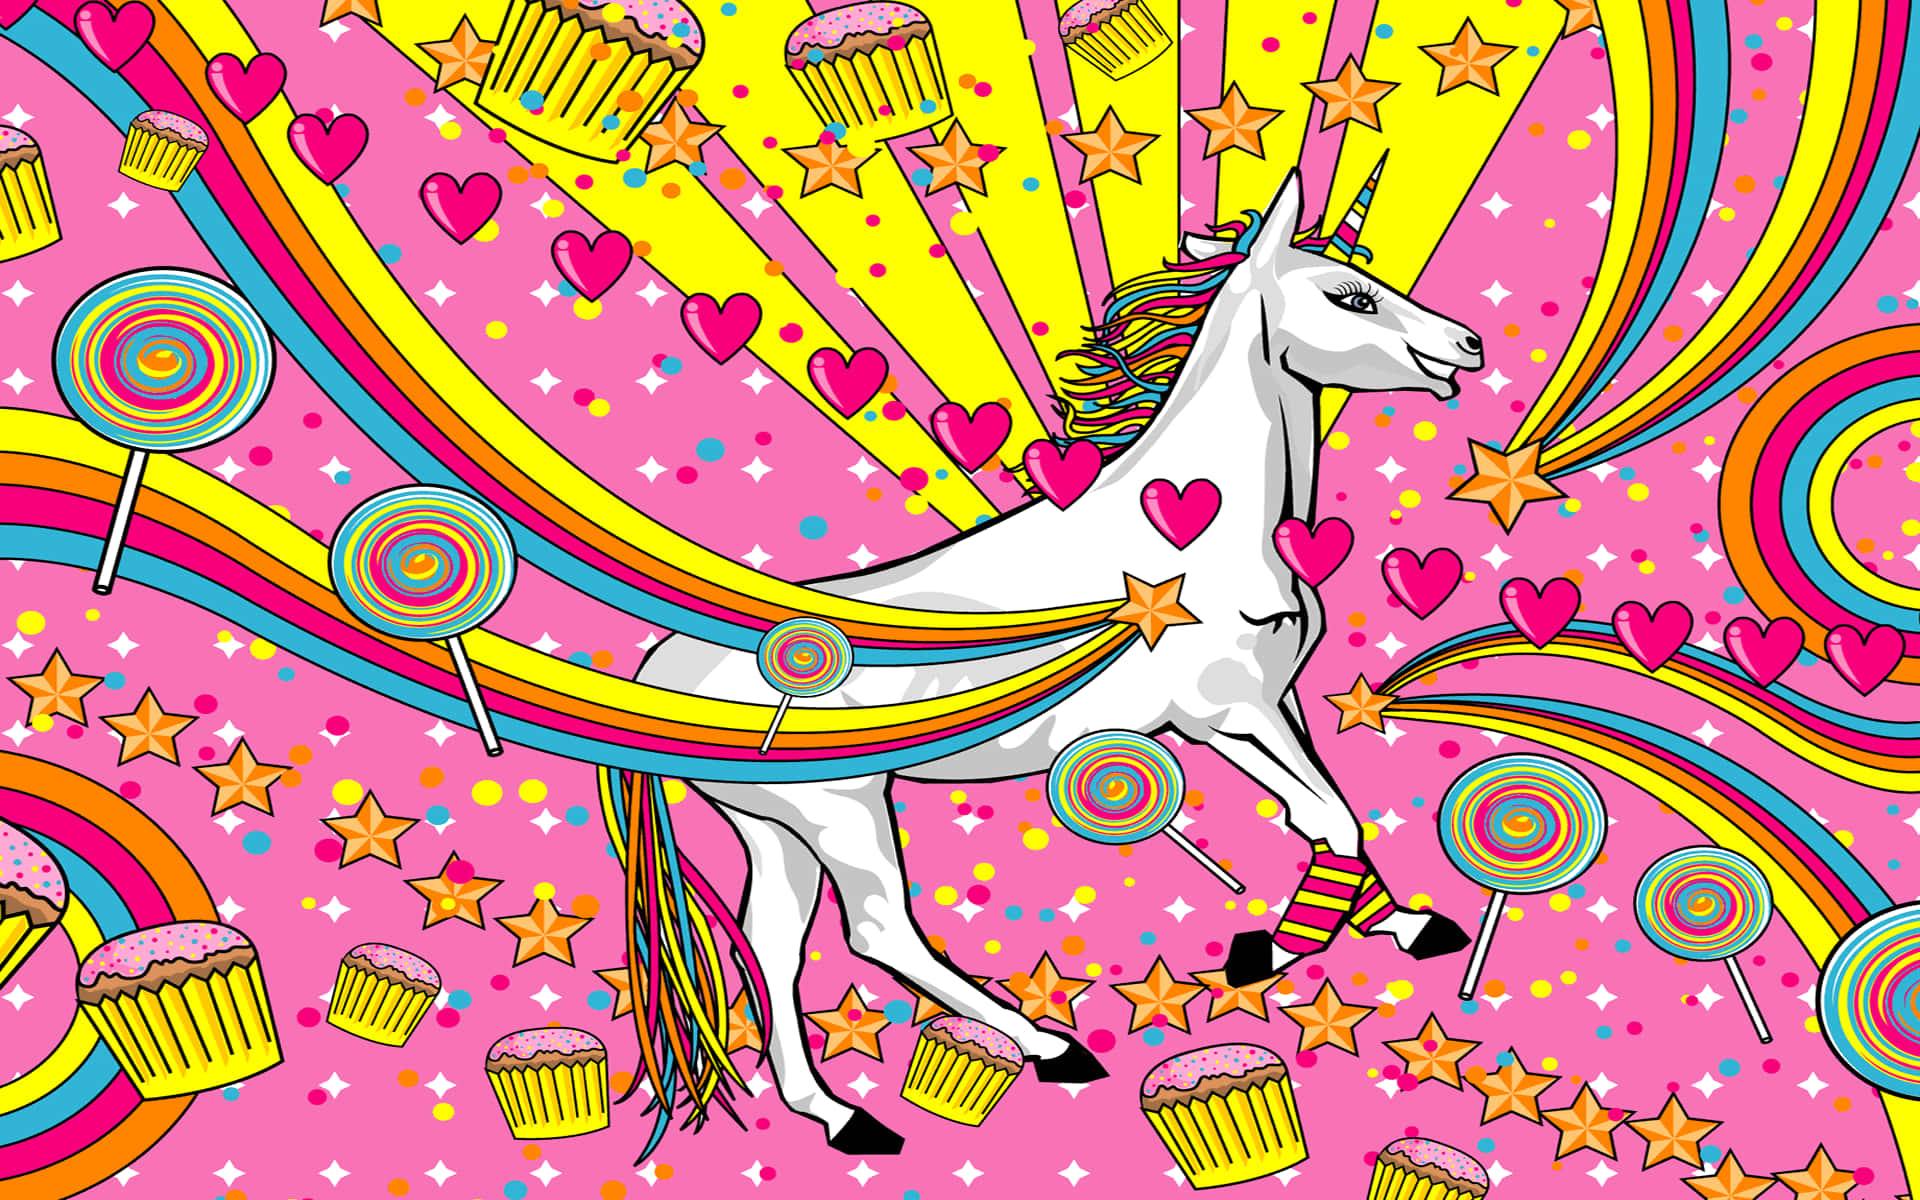 A Magical Coloring Picture of a Unicorn